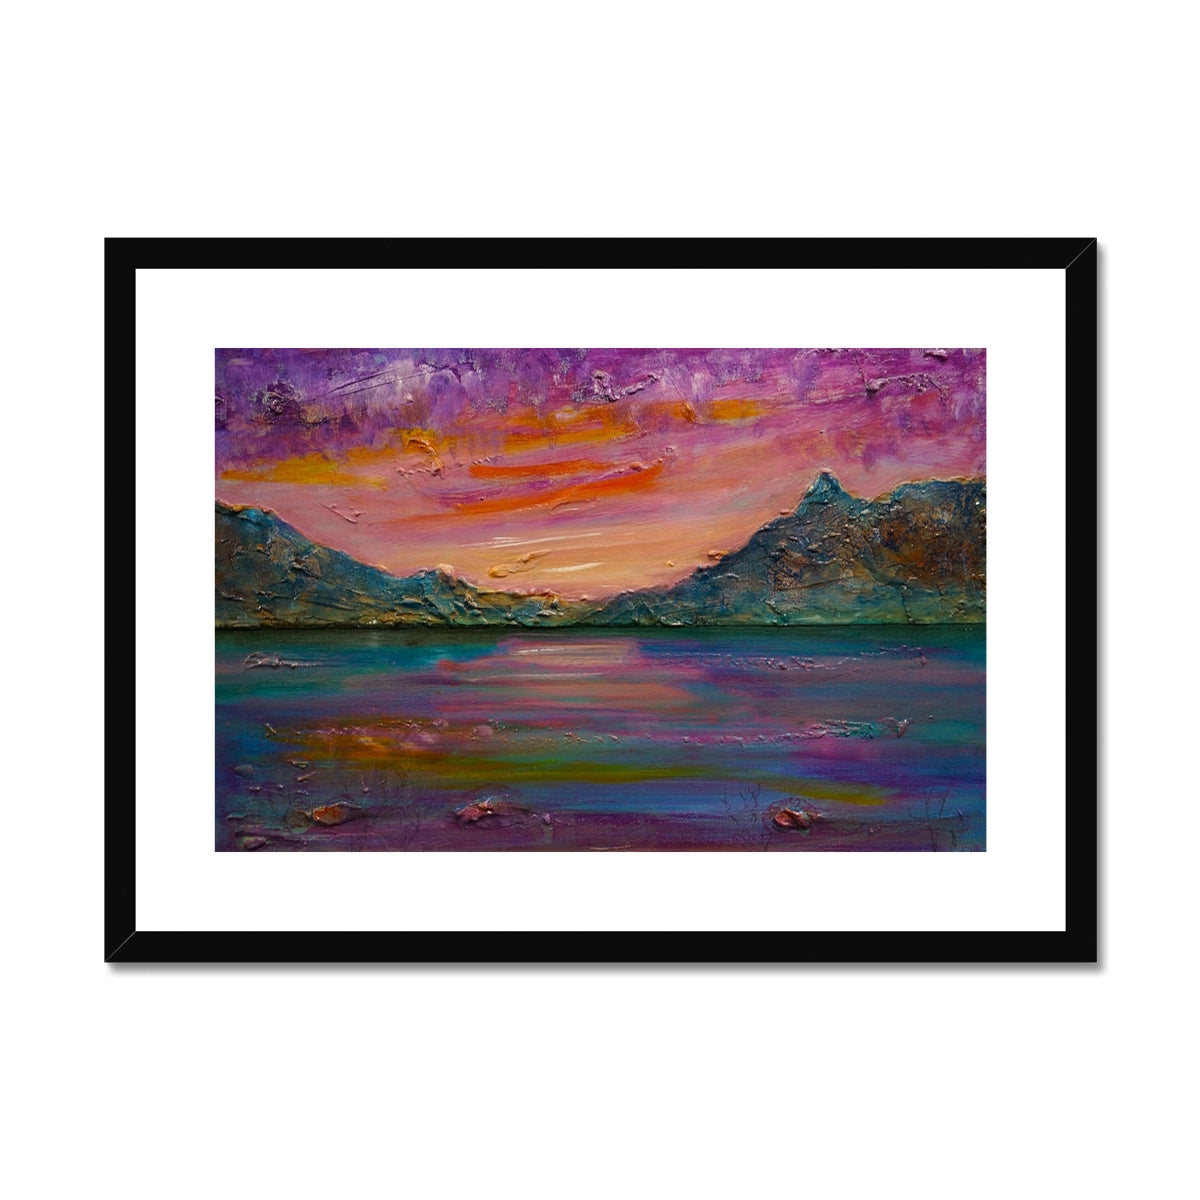 Loch Leven Sunset Painting | Framed & Mounted Prints From Scotland-Framed & Mounted Prints-Scottish Lochs & Mountains Art Gallery-A2 Landscape-Black Frame-Paintings, Prints, Homeware, Art Gifts From Scotland By Scottish Artist Kevin Hunter